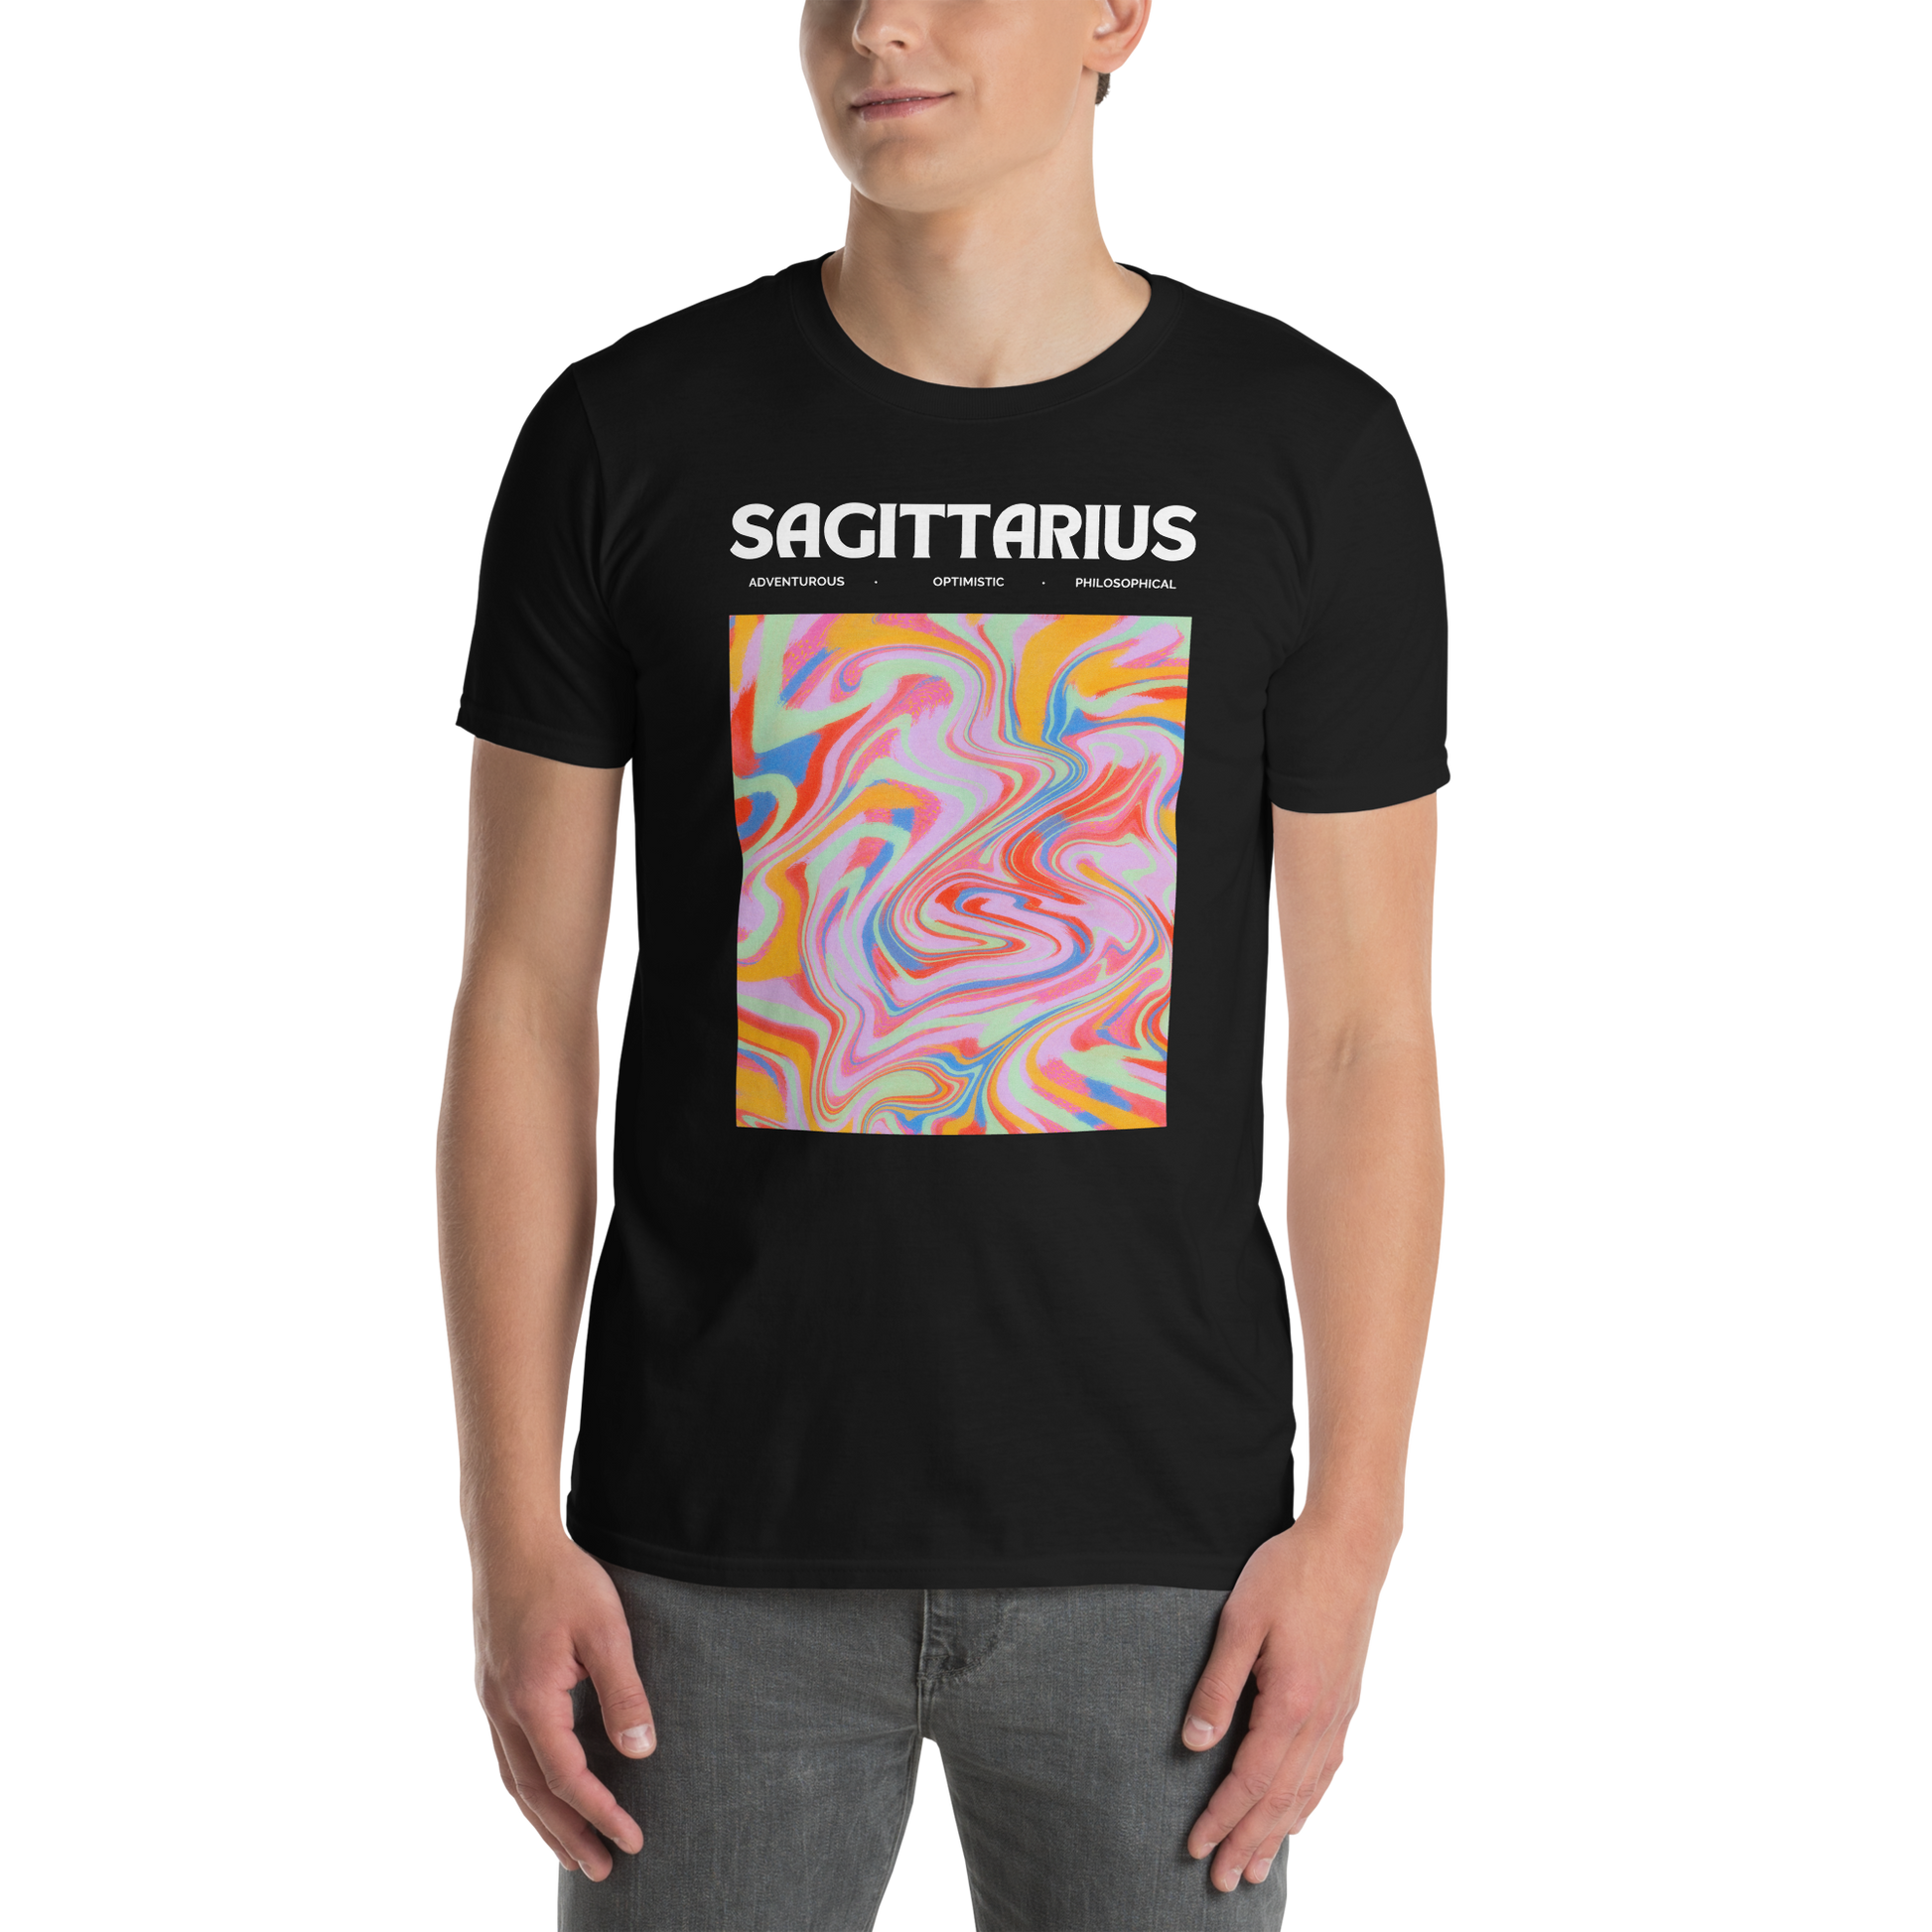 Man wearing a Black Sagittarius T-Shirt featuring an Abstract Sagittarius Star Sign graphic on the chest - Cool Graphic Zodiac T-Shirts - Boozy Fox